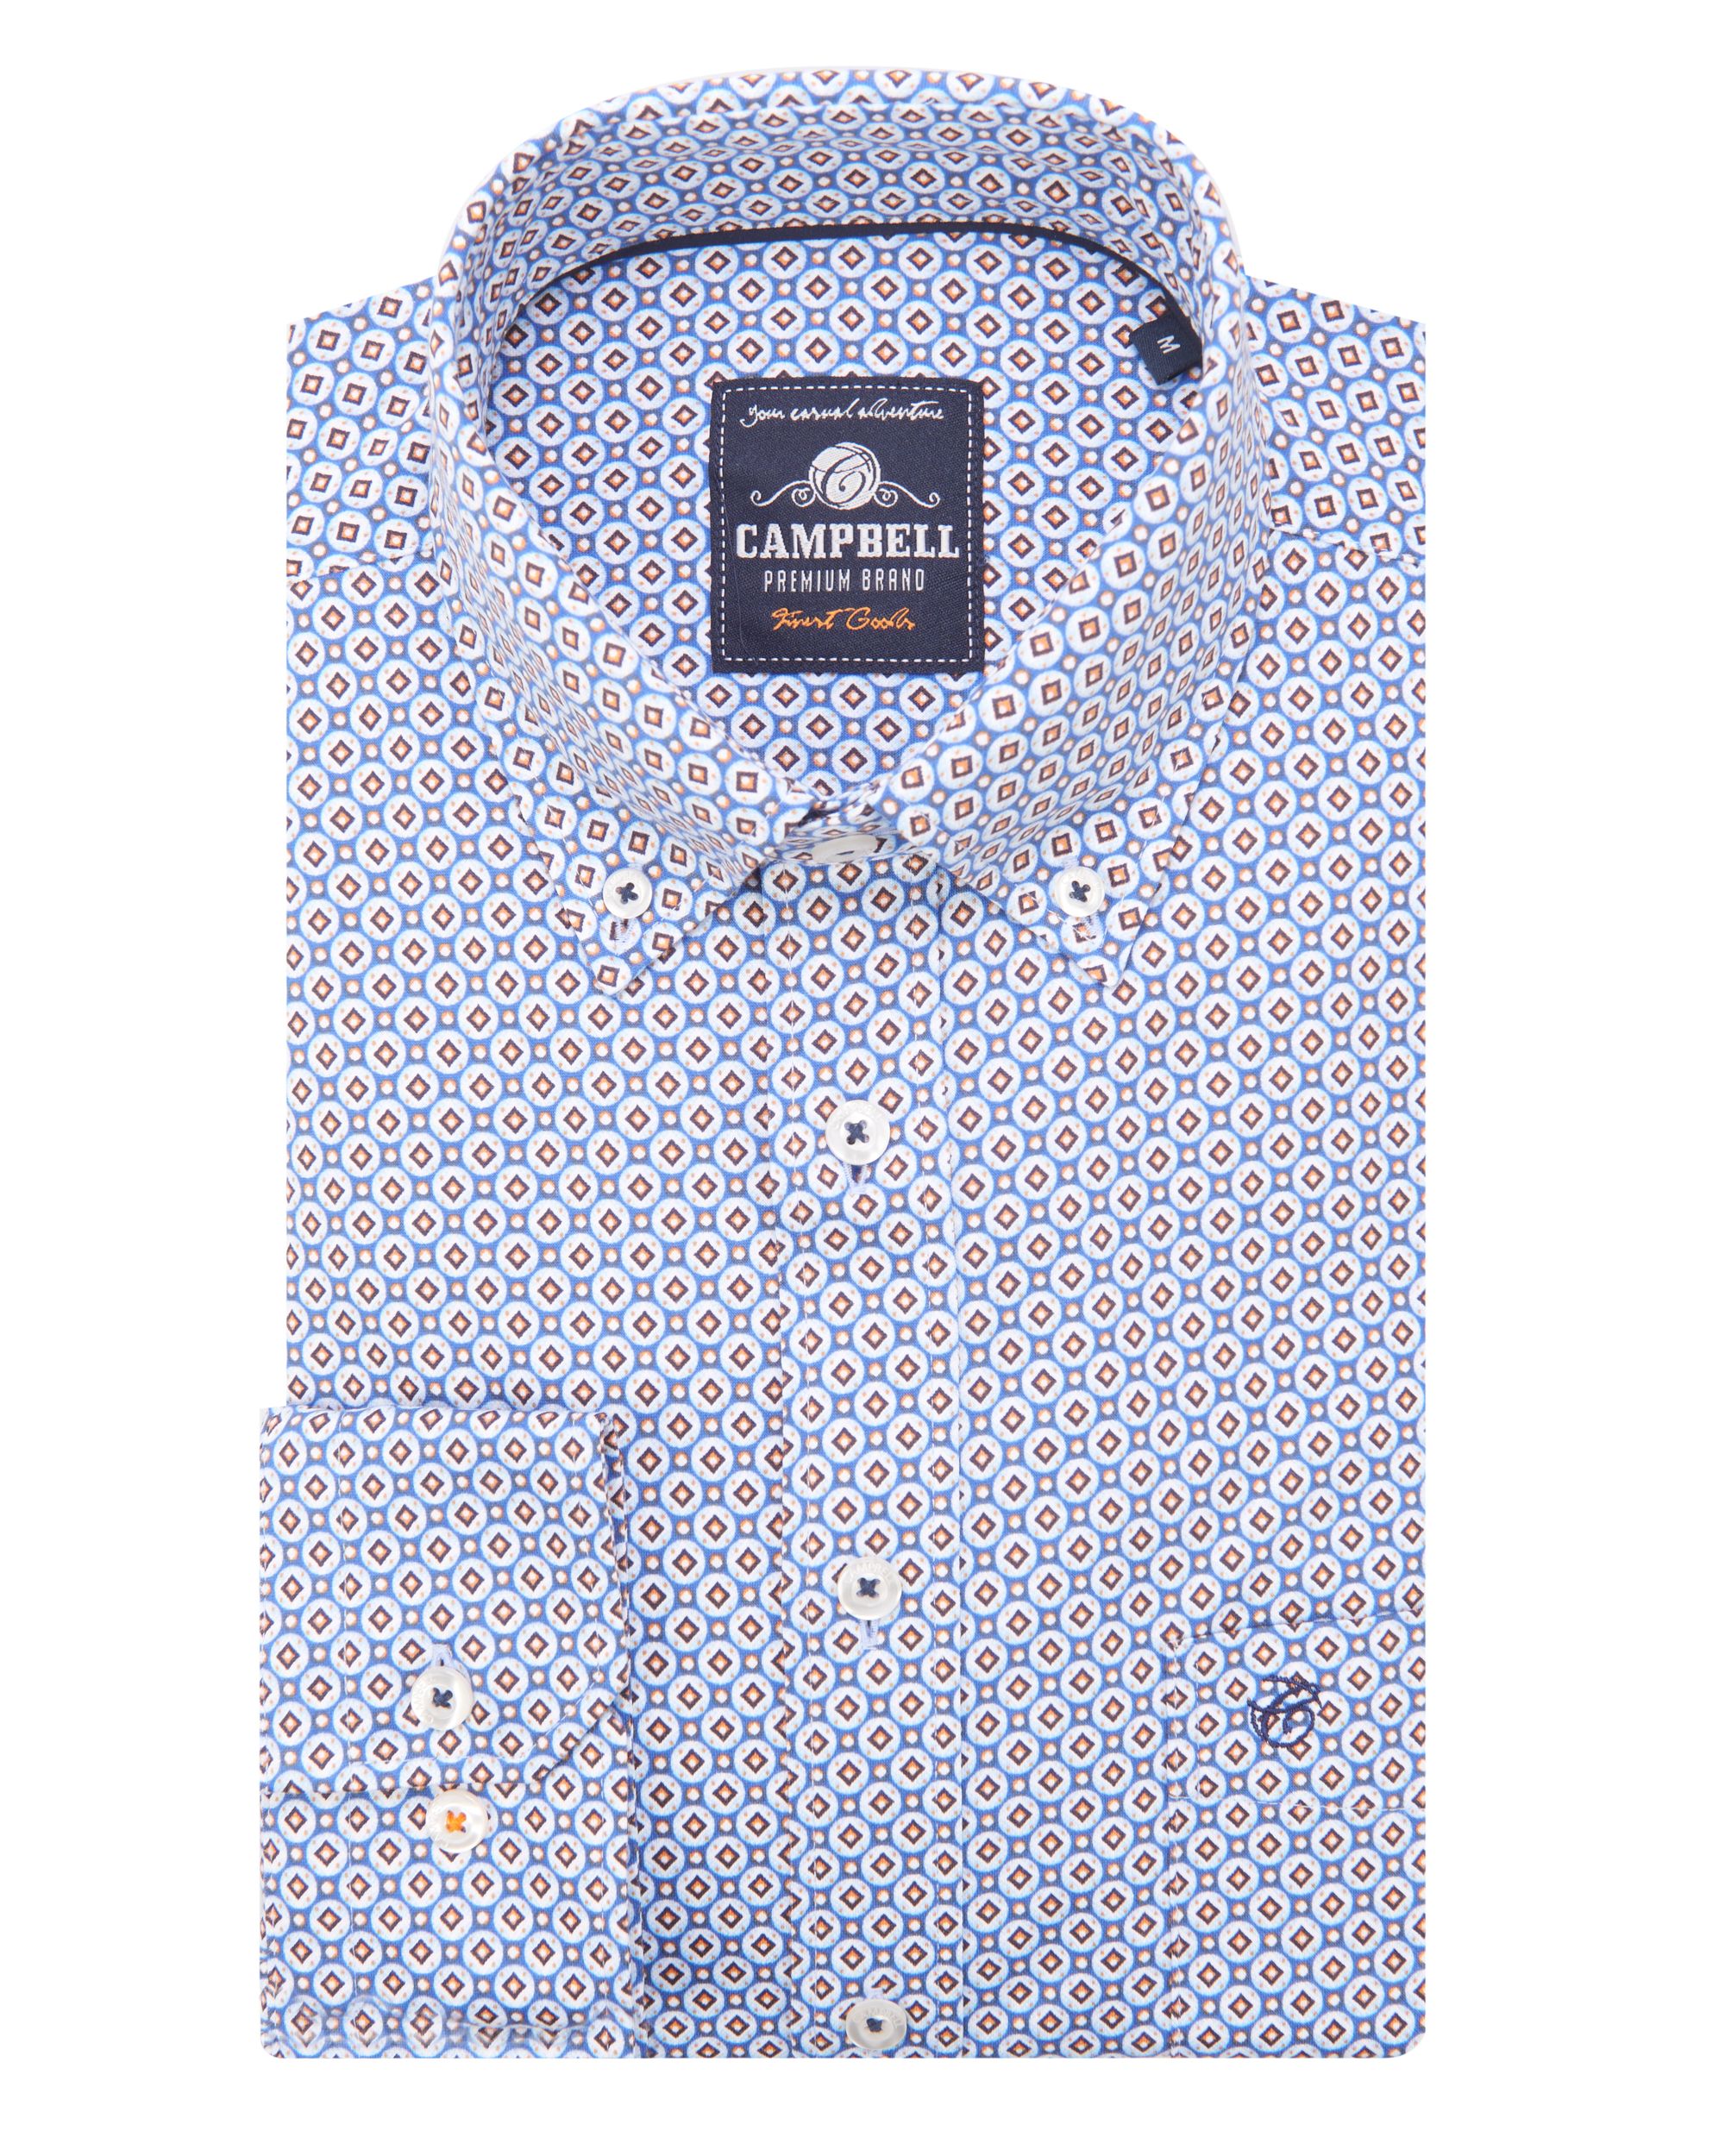 Campbell Classic Casual Overhemd LM Blauw dessin 084667-001-L